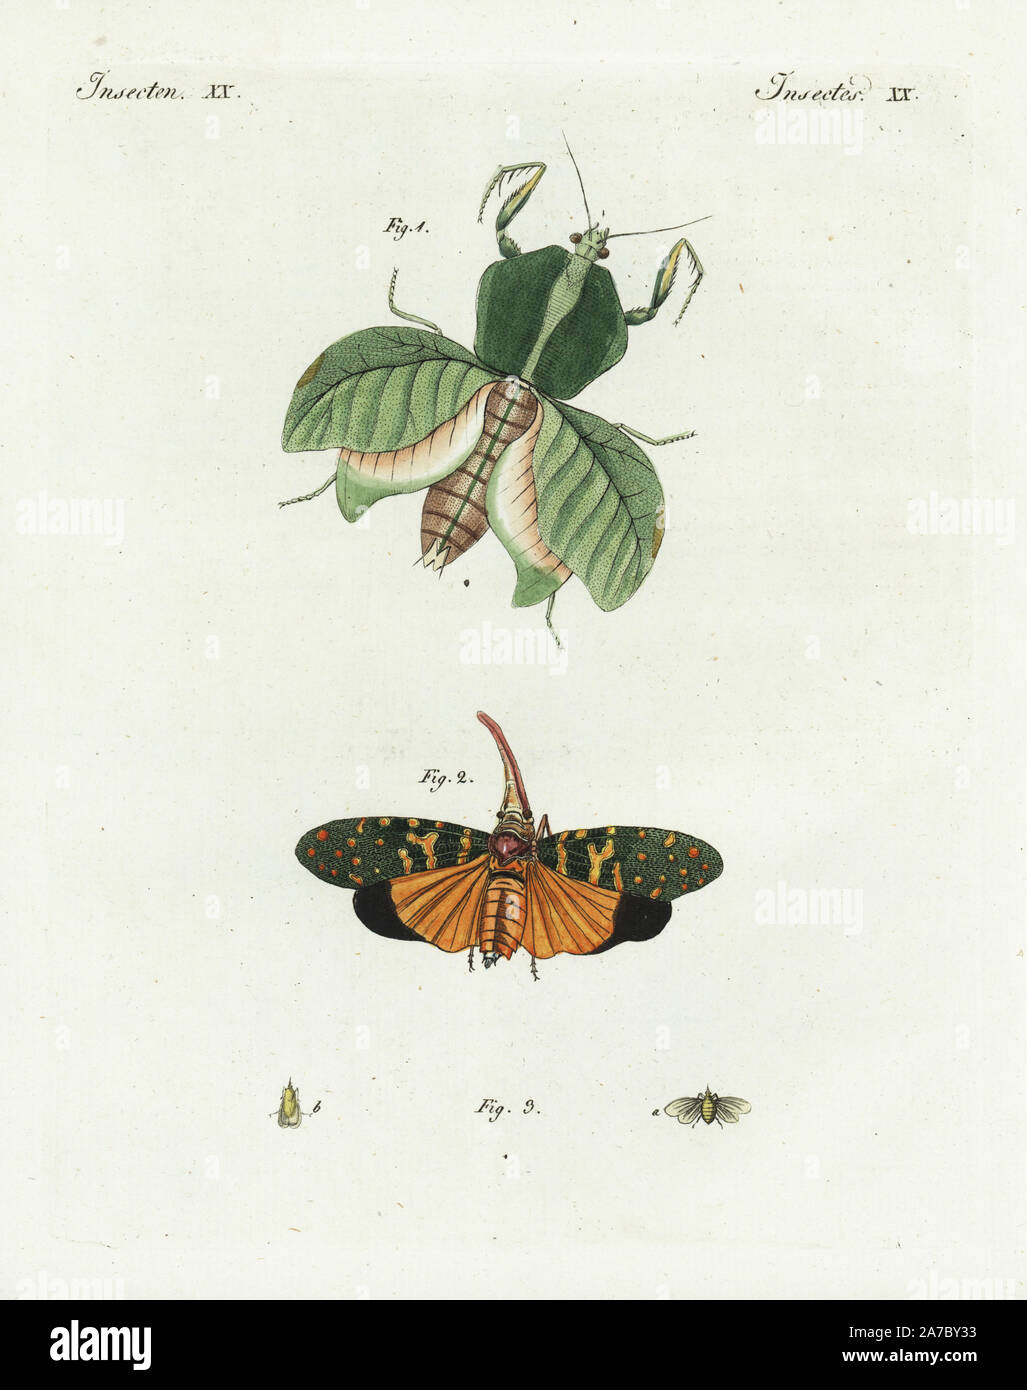 Leaf mantis, Choeradodis strumaria 1, lantern fly, Fulgora laternaria 2, and european lantern fly, Dictyophara europaea 3. Handcoloured copperplate engraving from Bertuch's 'Bilderbuch fur Kinder' (Picture Book for Children), Weimar, 1798. Friedrich Johann Bertuch (1747-1822) was a German publisher and man of arts most famous for his 12-volume encyclopedia for children illustrated with 1,200 engraved plates on natural history, science, costume, mythology, etc., published from 1790-1830. Stock Photo